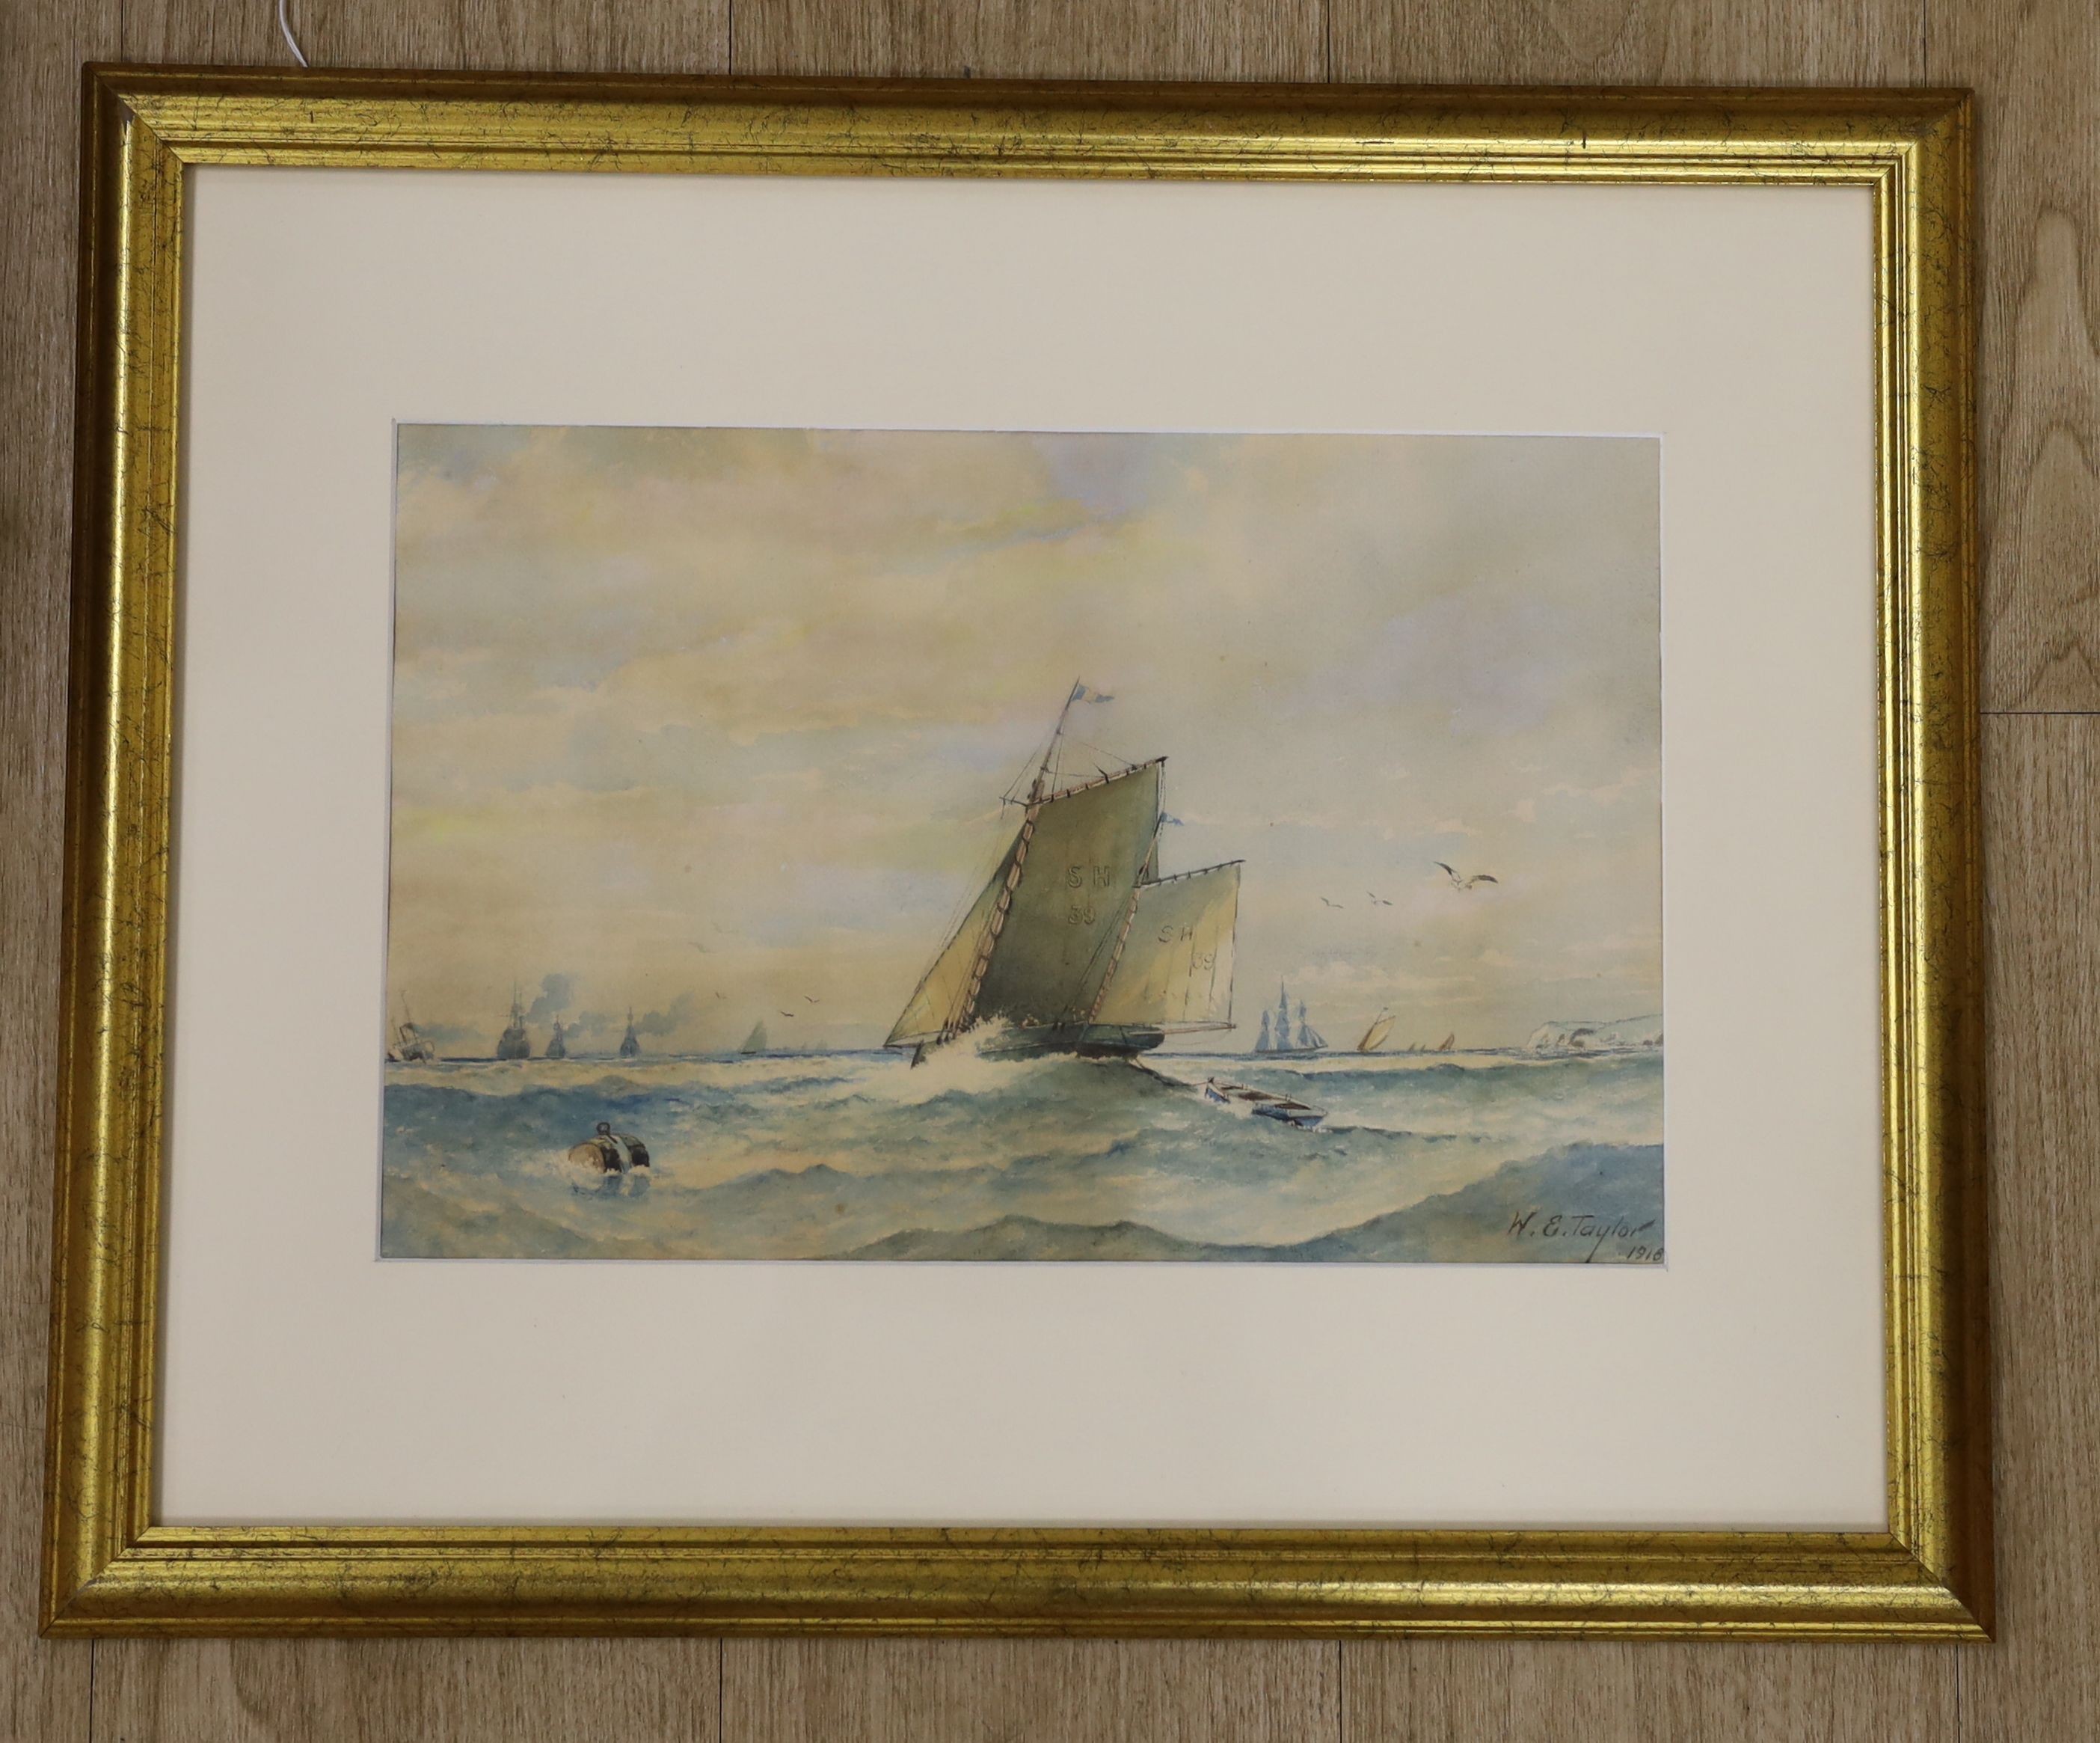 W. E. Taylor, watercolour, Shipping off the coast, signed and dated 1918, 24 x 37cm - Image 2 of 3